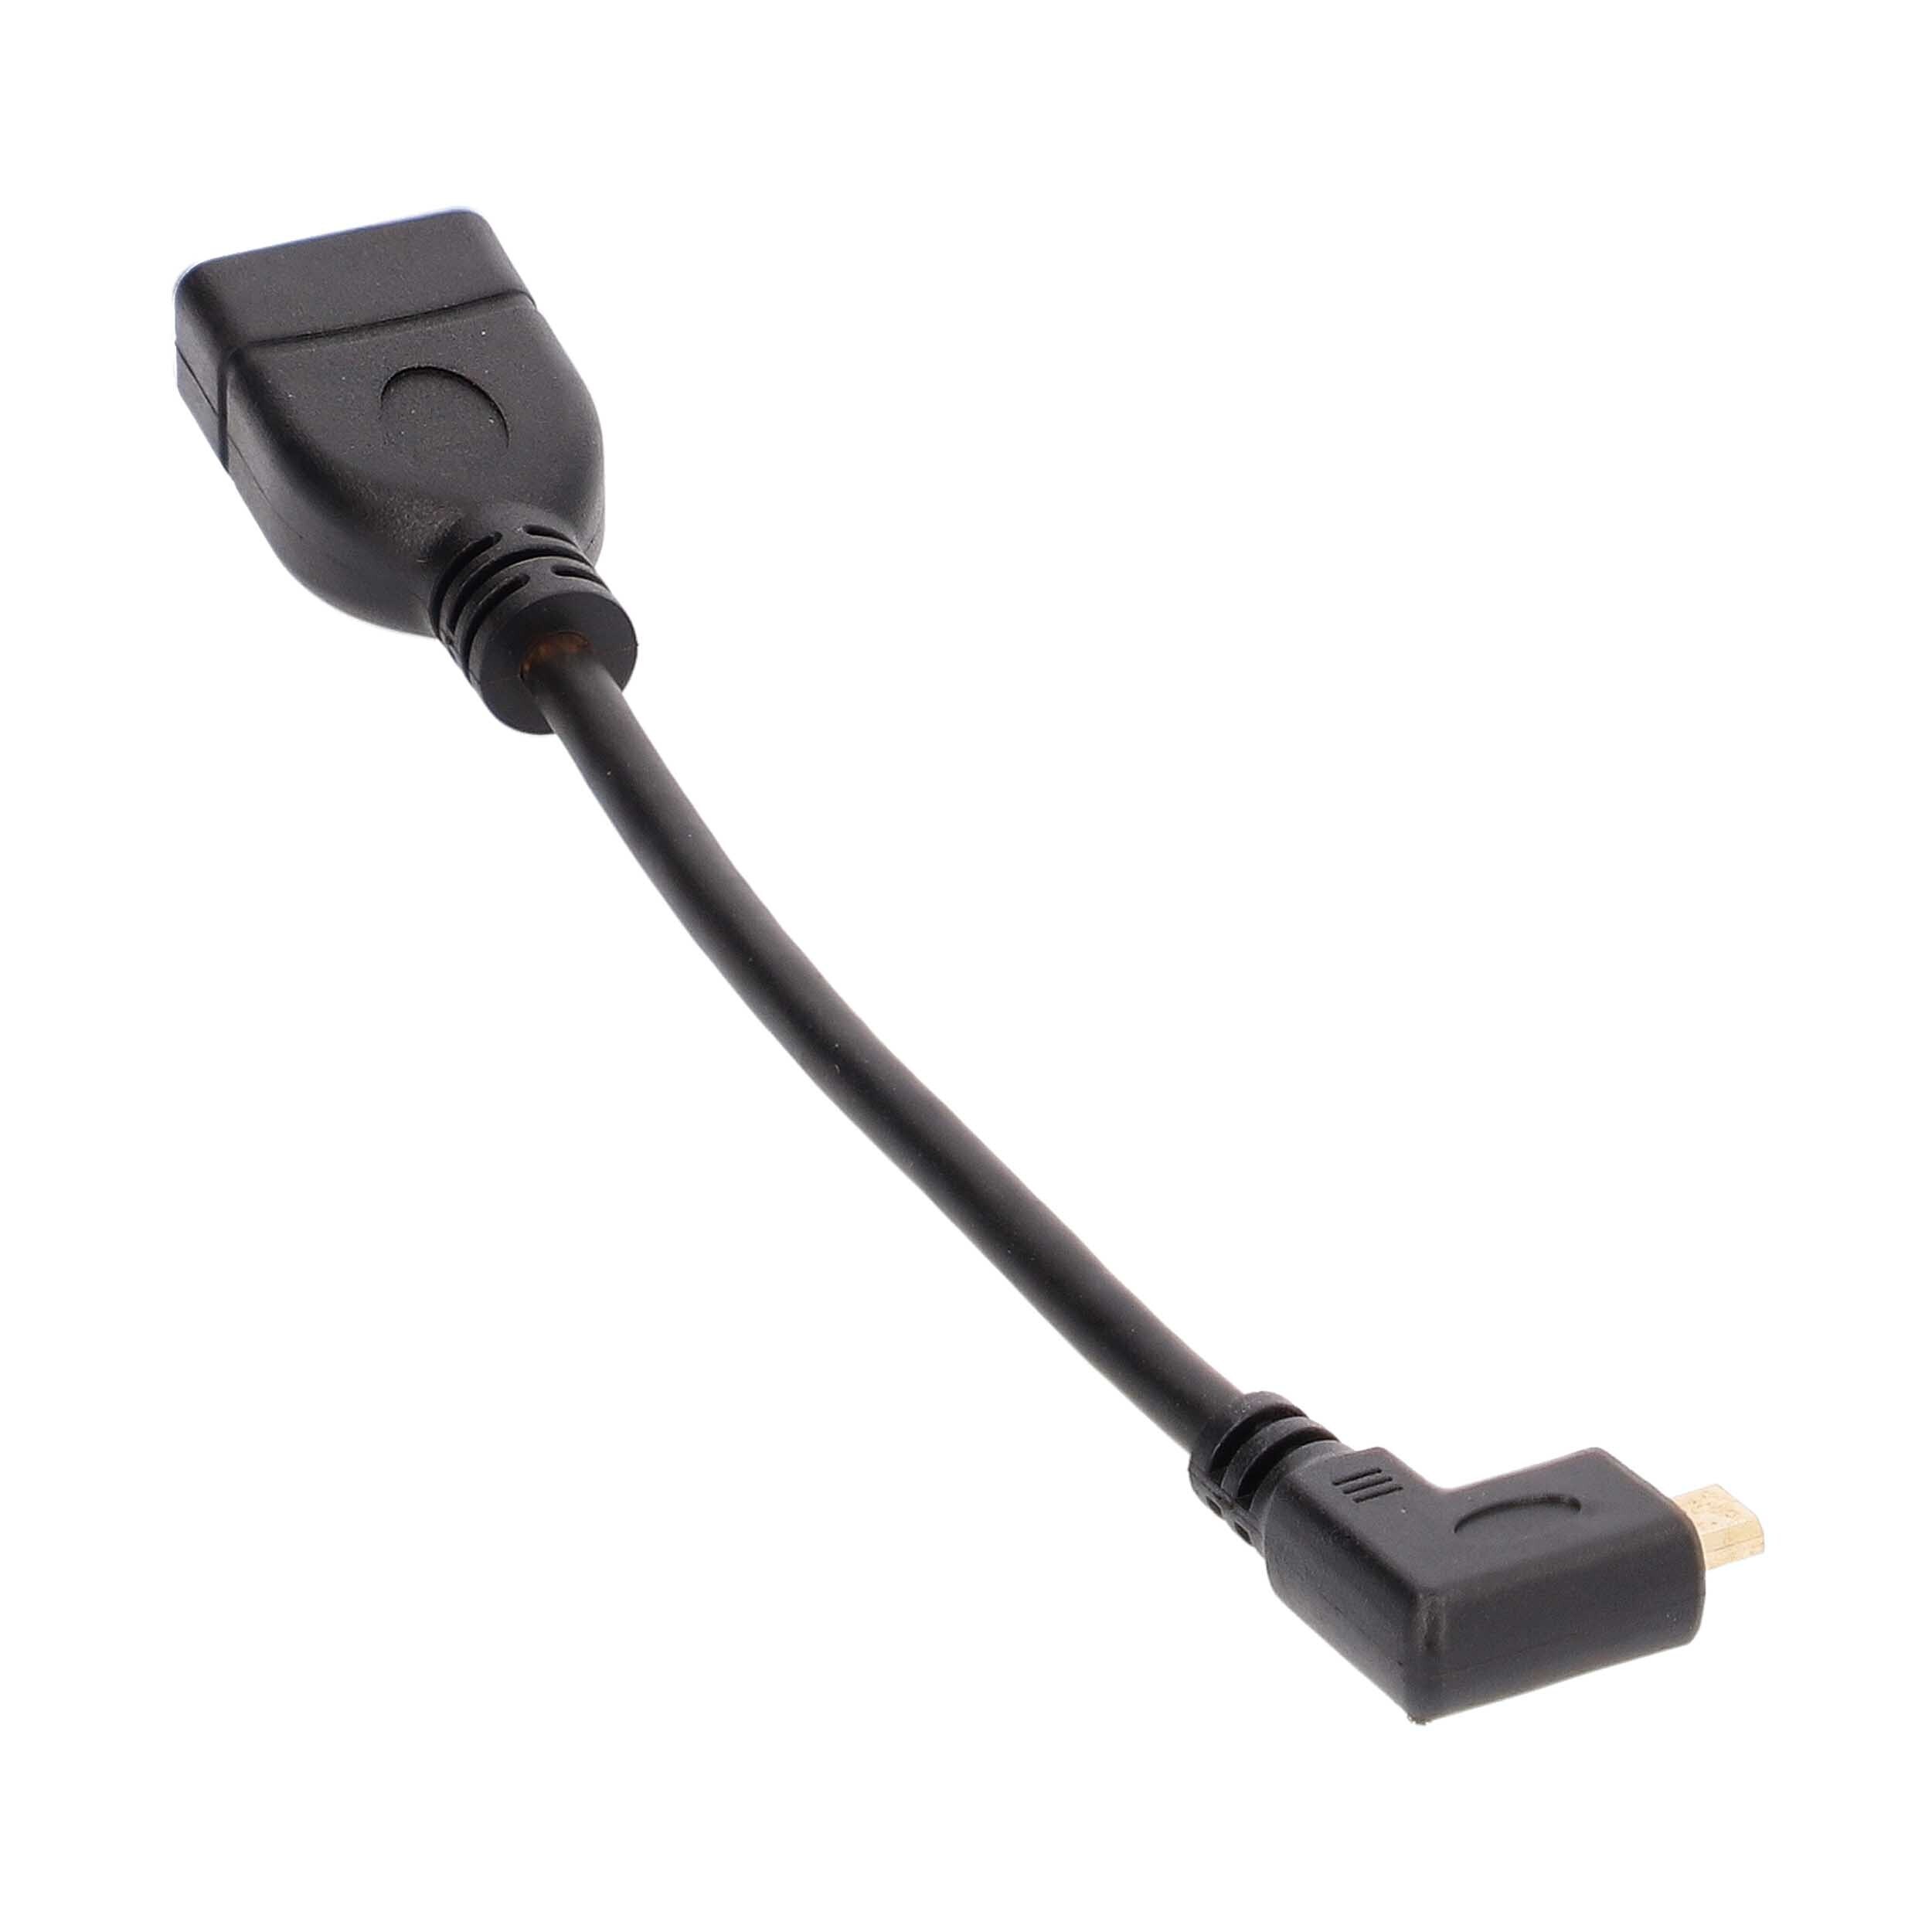 HDMI® to male micro HDMI® adapter - Retail Pack